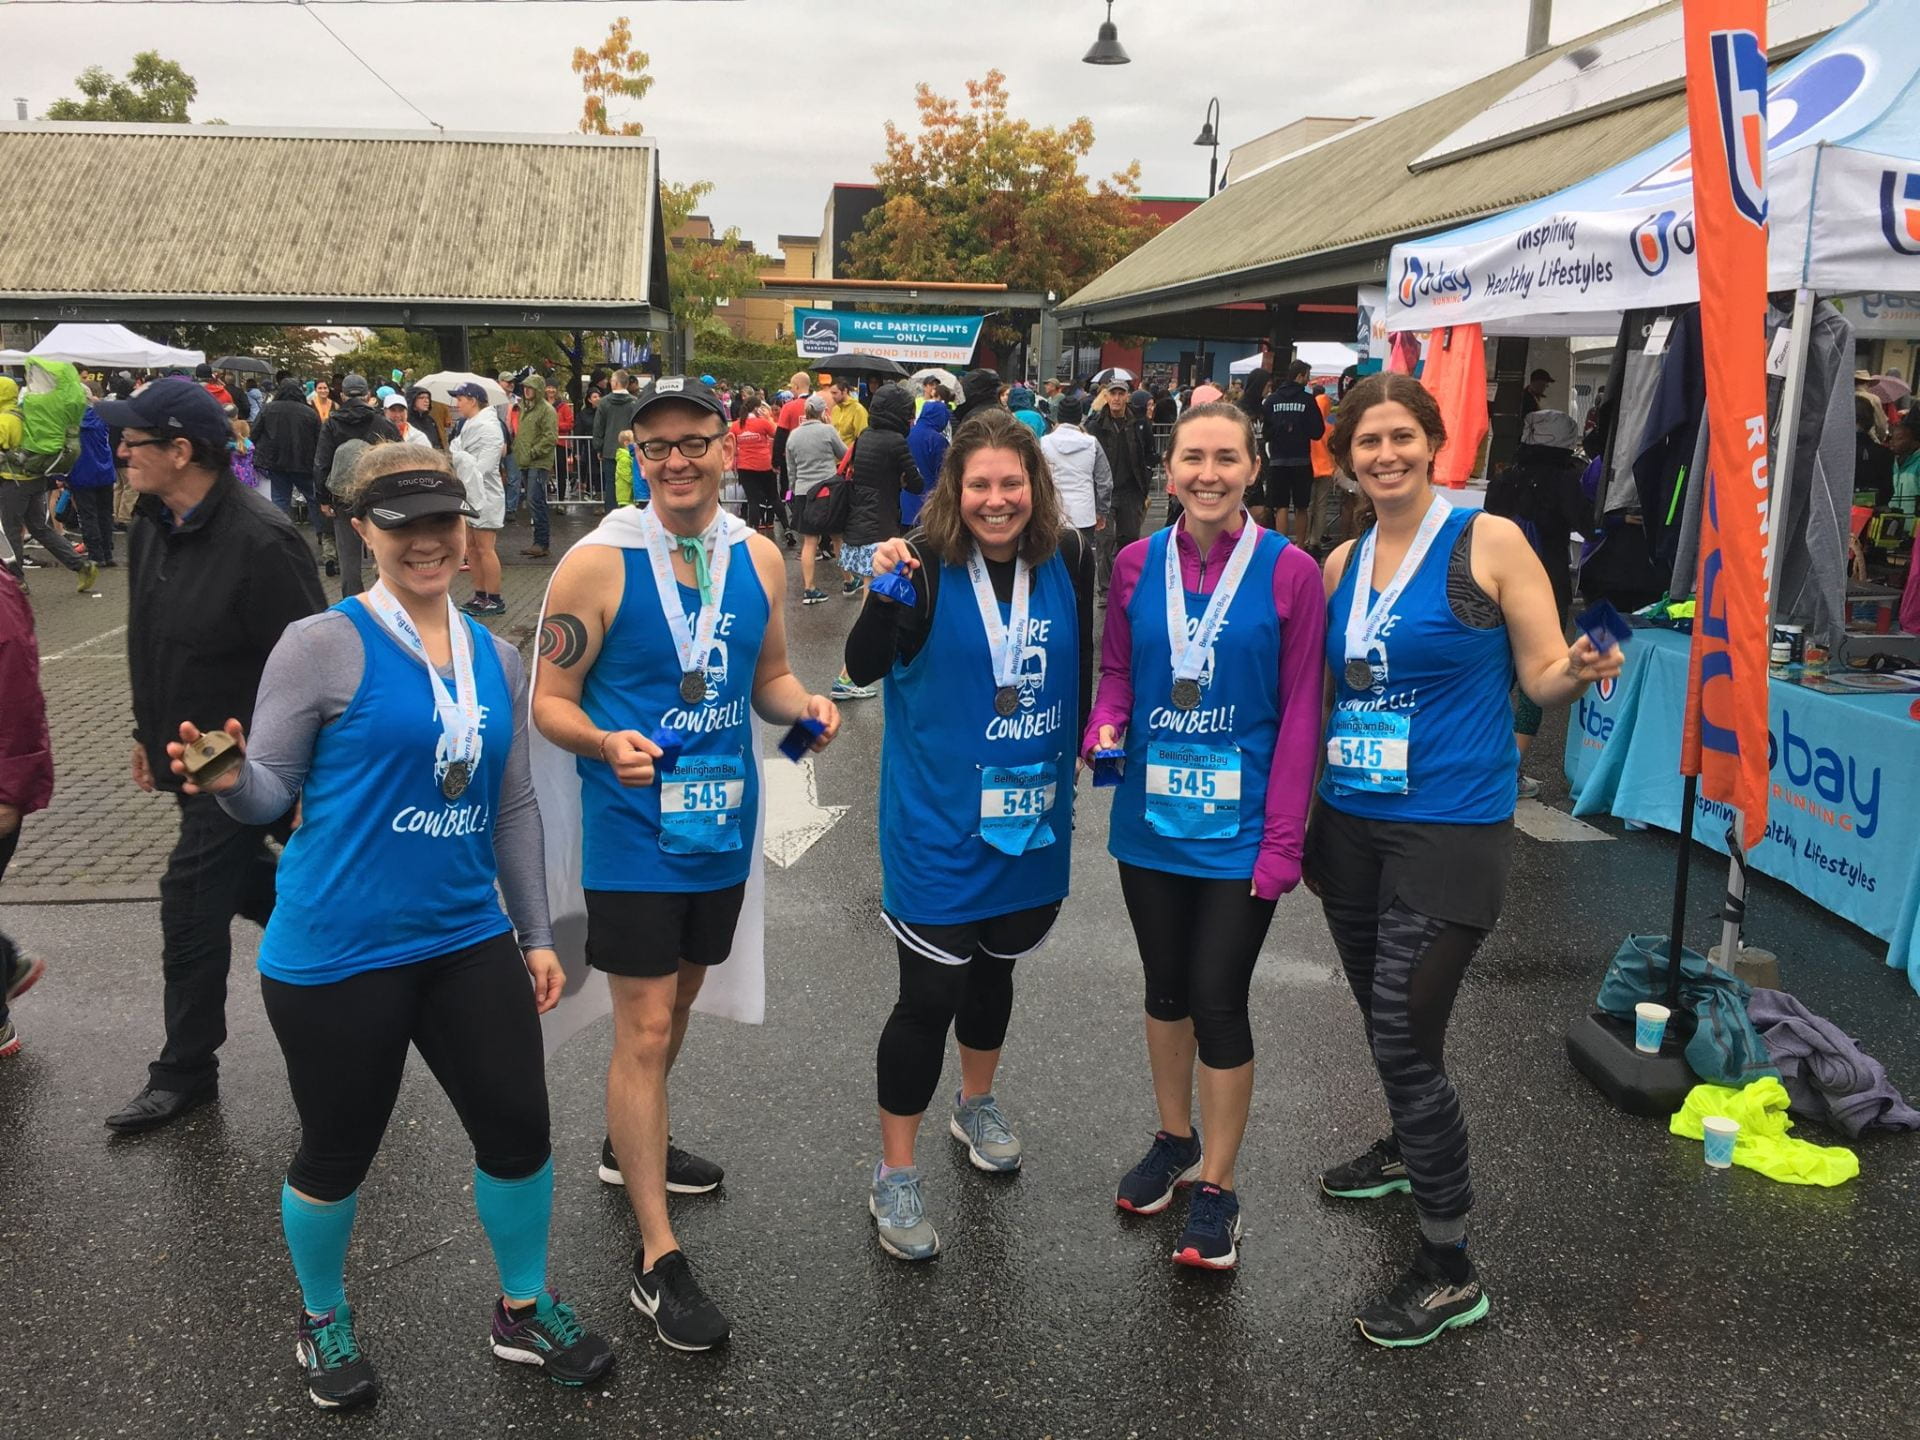 More Cowbell Team at the Bellingham Bay Marathon. 5 people in blue shirts with medals hanging around their necks